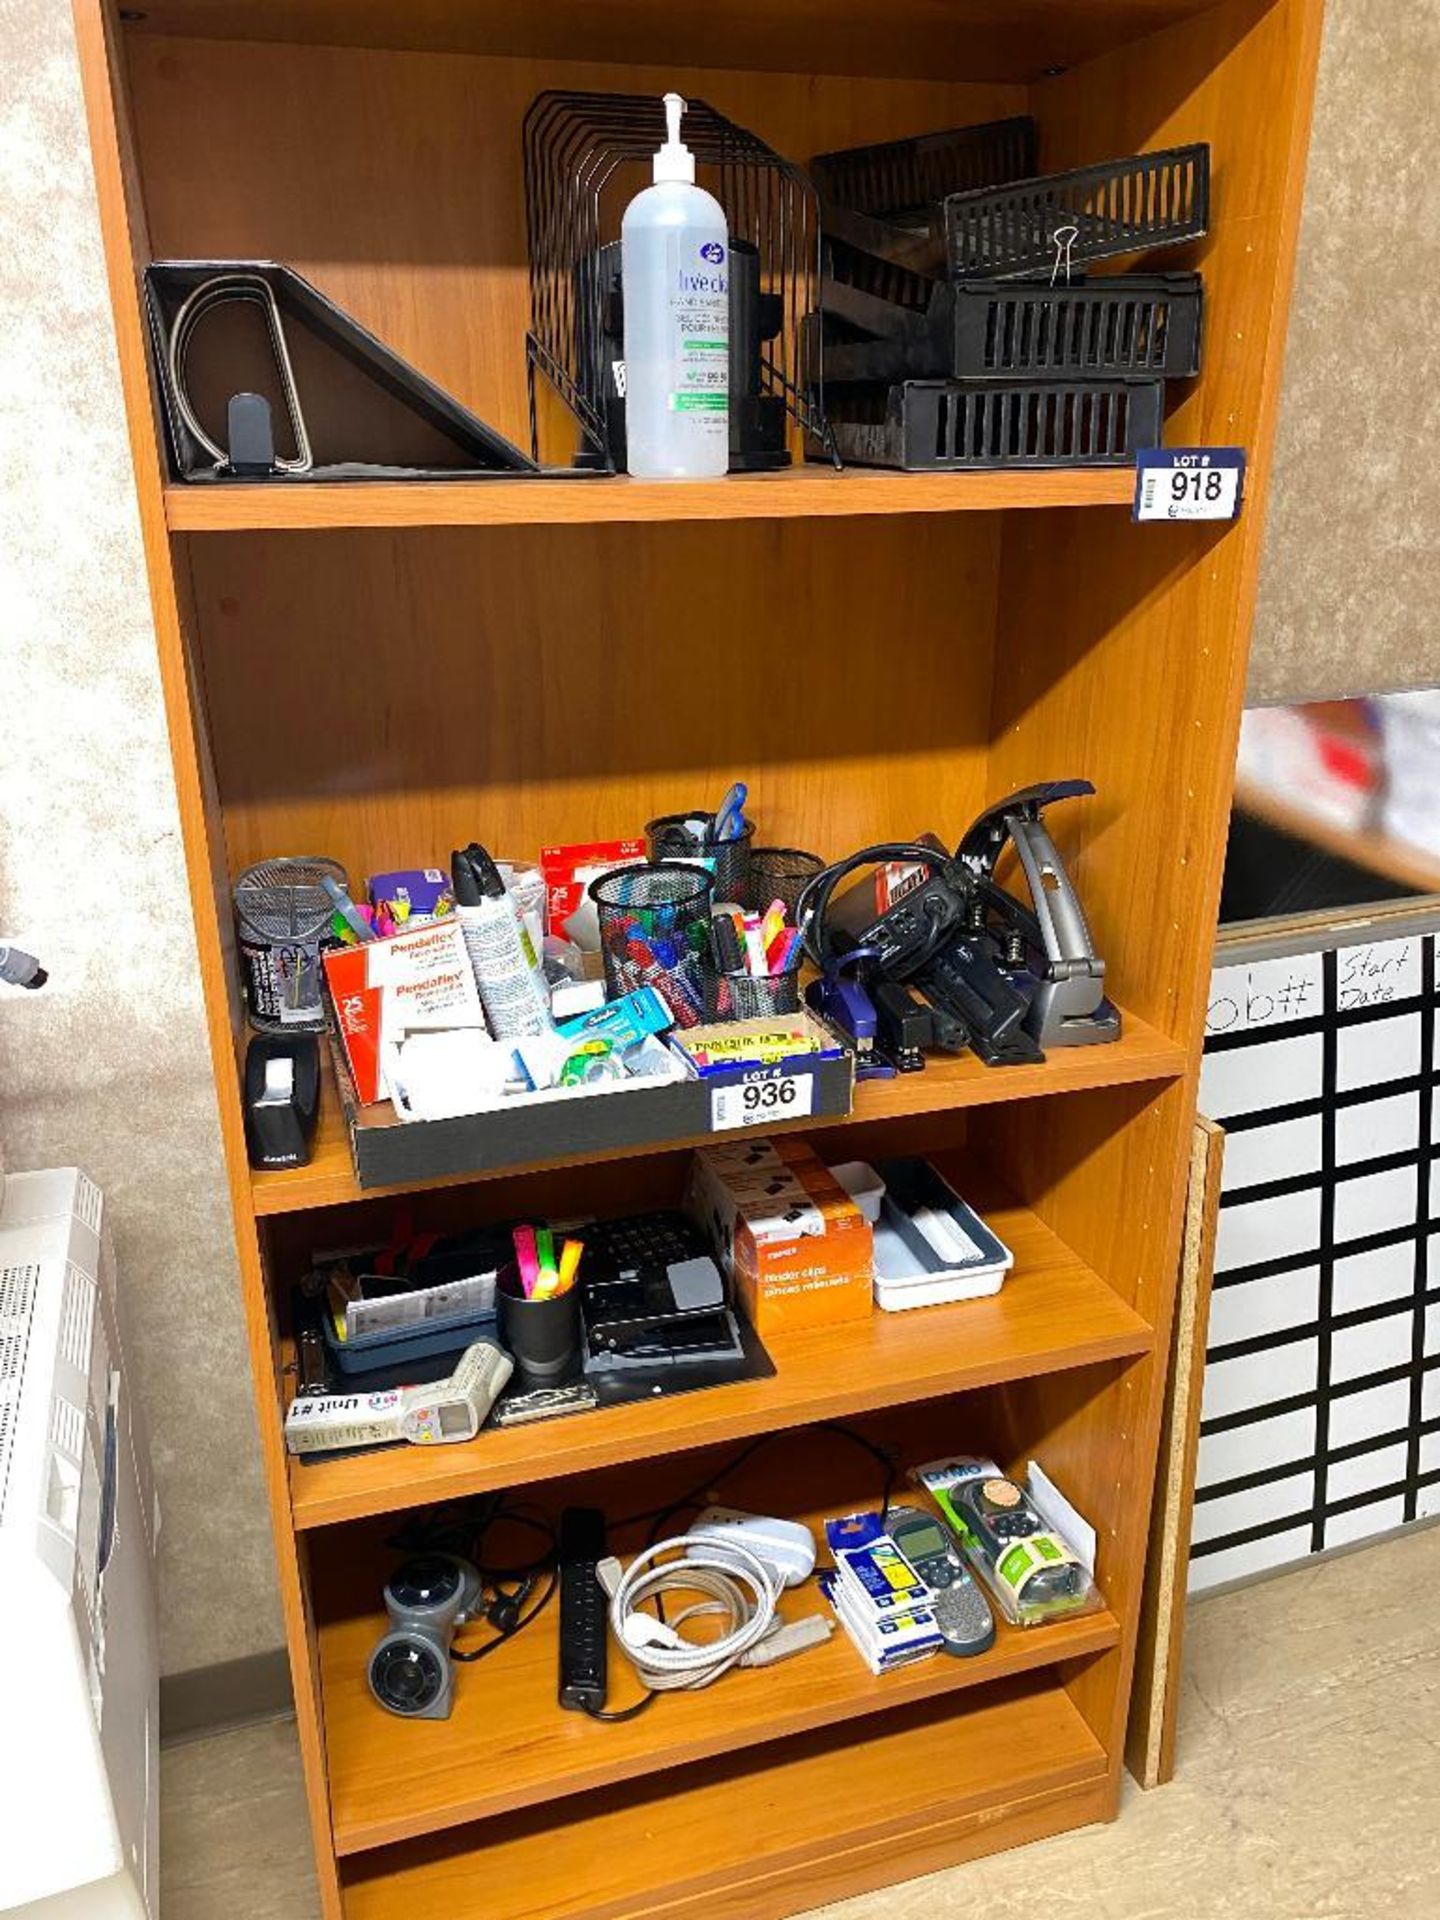 Lot of Asst. Office Supplies including Power Bar, Hole Punches, Staplers, Label Printer, etc.